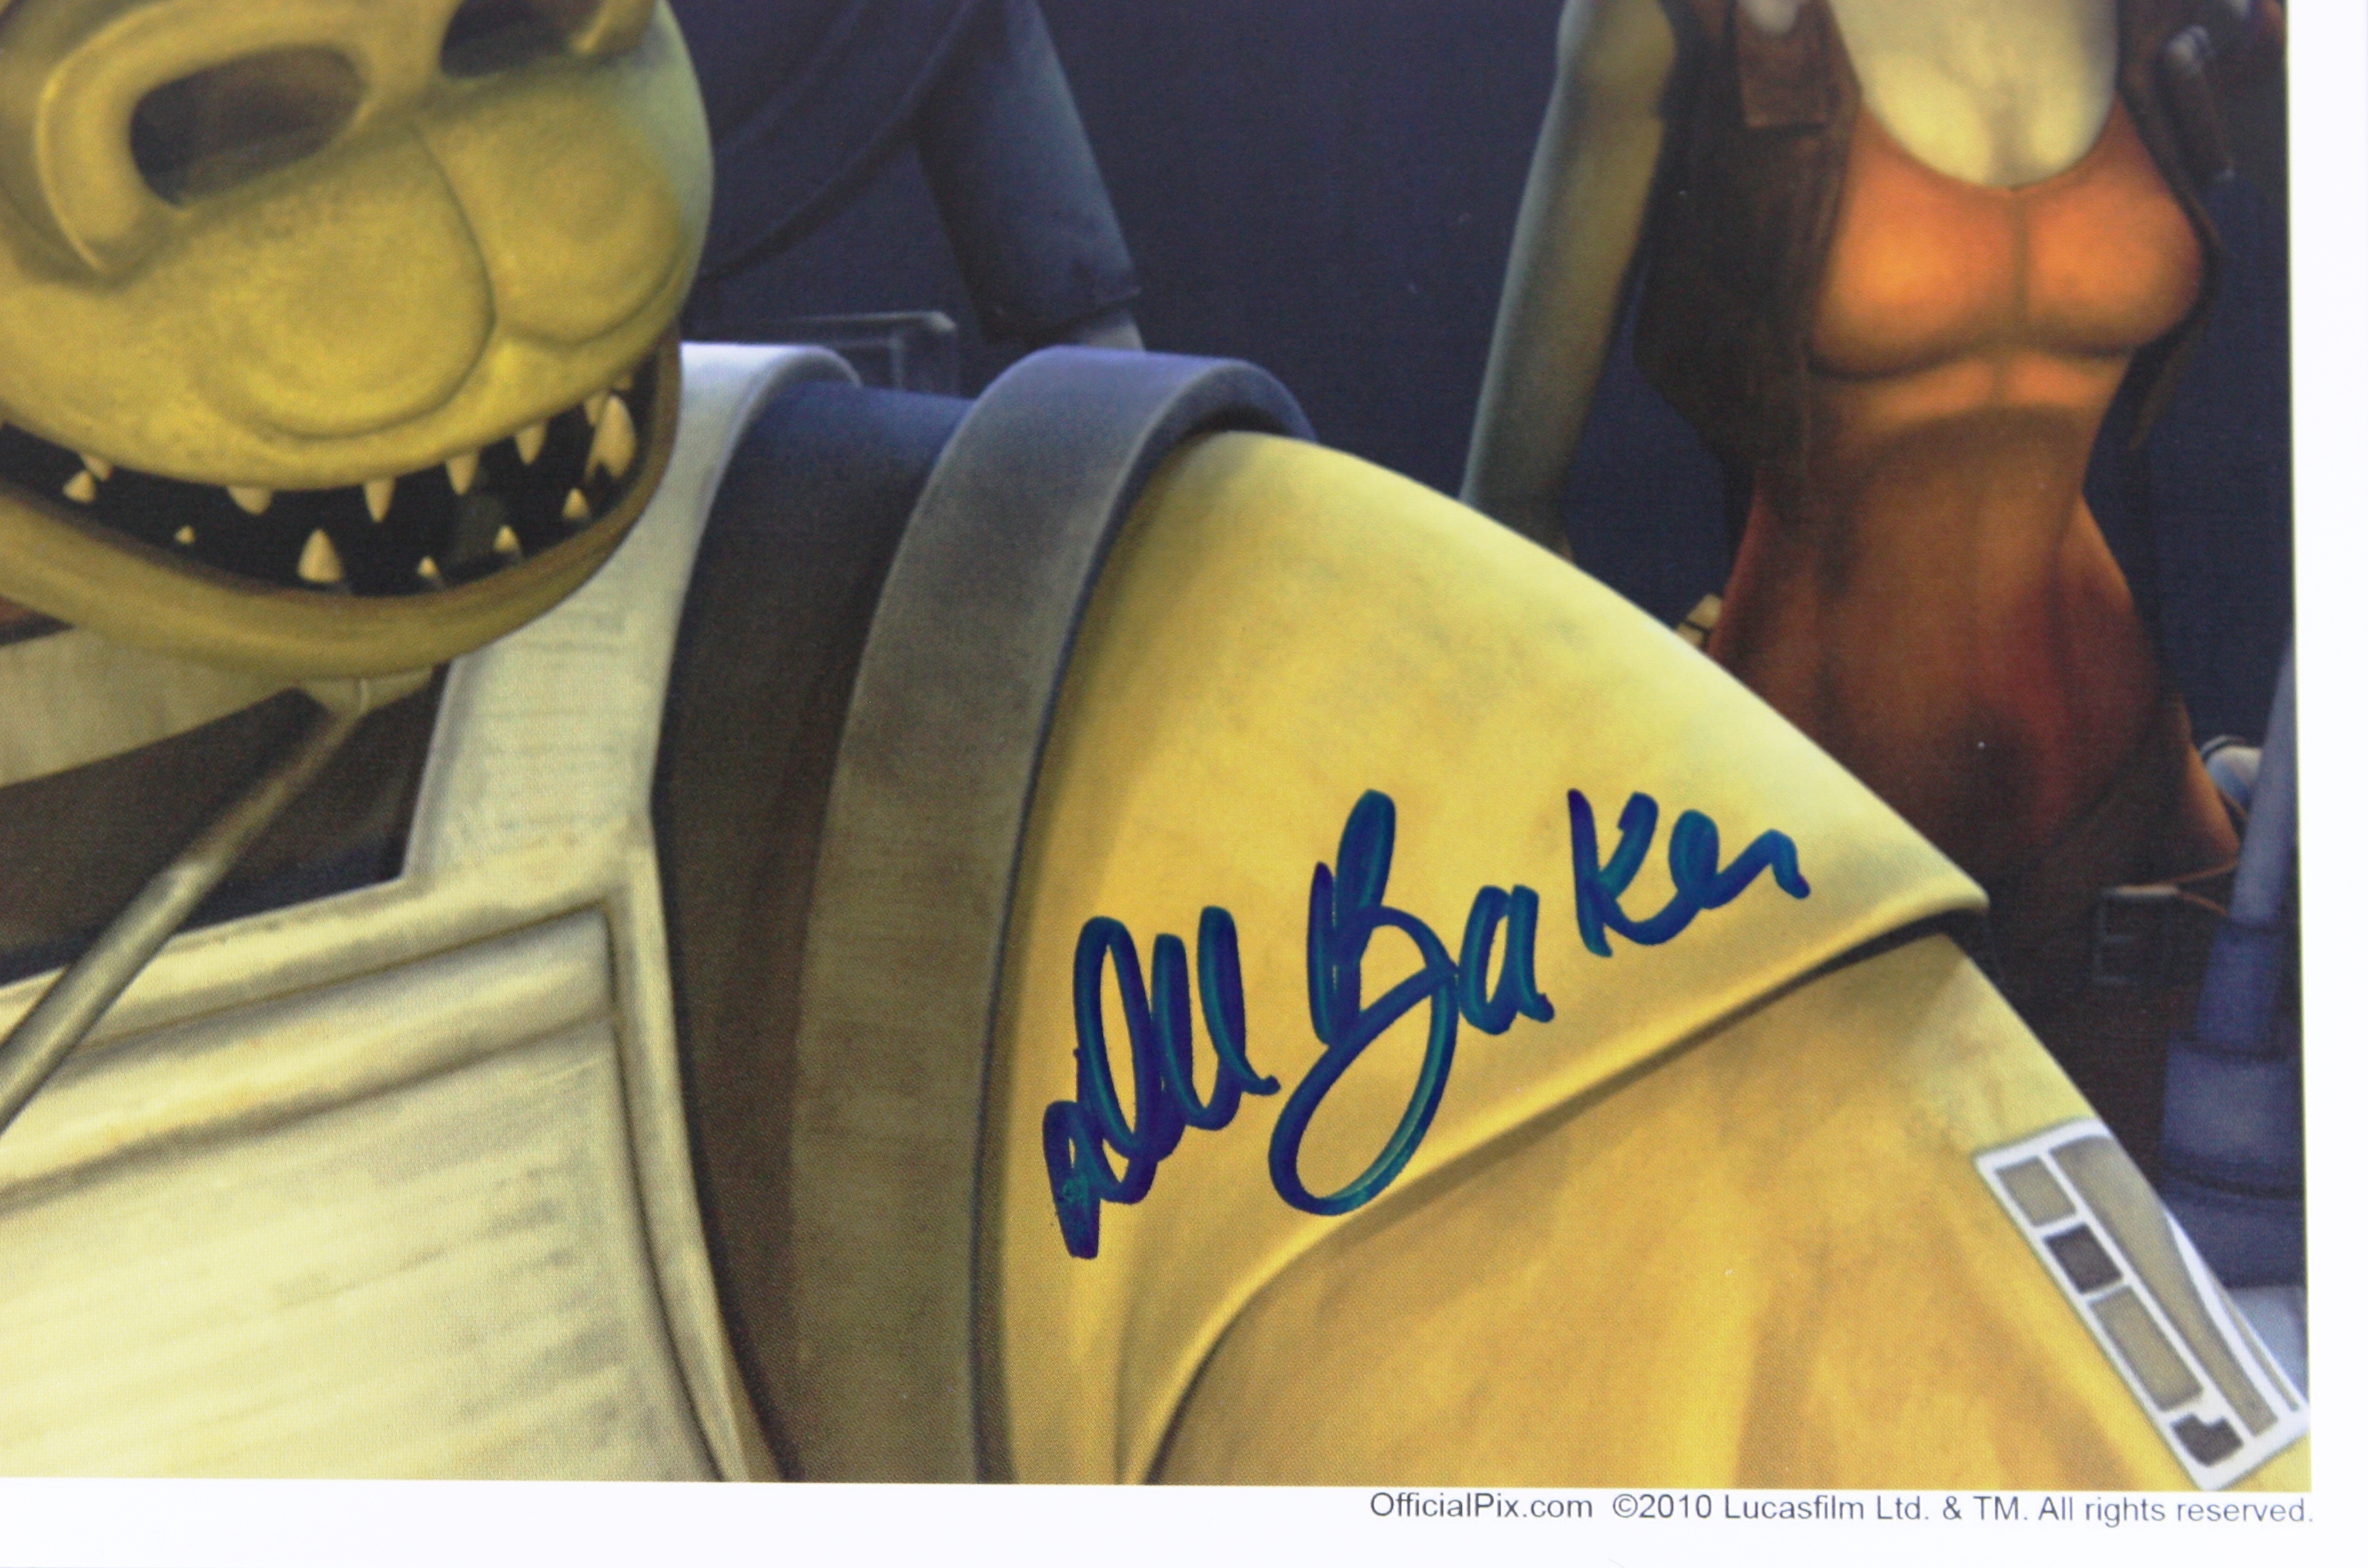 STAR WARS - THE CLONE WARS - DEE BRADLEY BAKER SIGNED OFFICIAL PIX PHOTO - Image 2 of 2